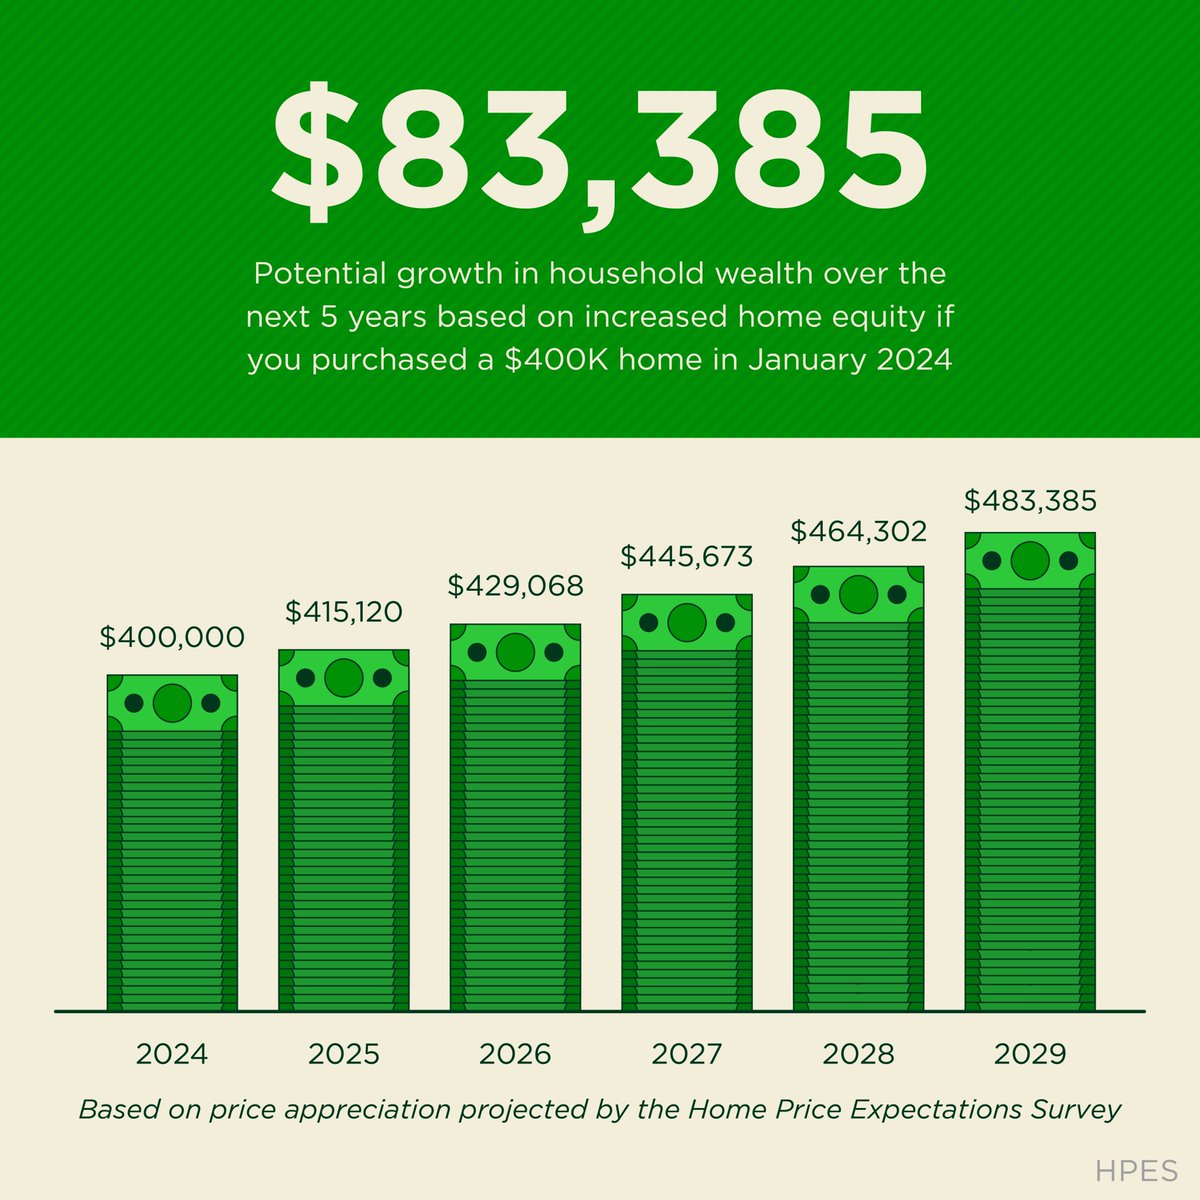 If you’re dreaming of buying a home, you might not want to wait – homes are just going to get more expensive. 

#brandonking #brandonkinghomesellingteam #exprealty #besthomesincalifornia  #investinyourfuture #buildingwealth #starttoday #homepriceappreciation #priceforecast